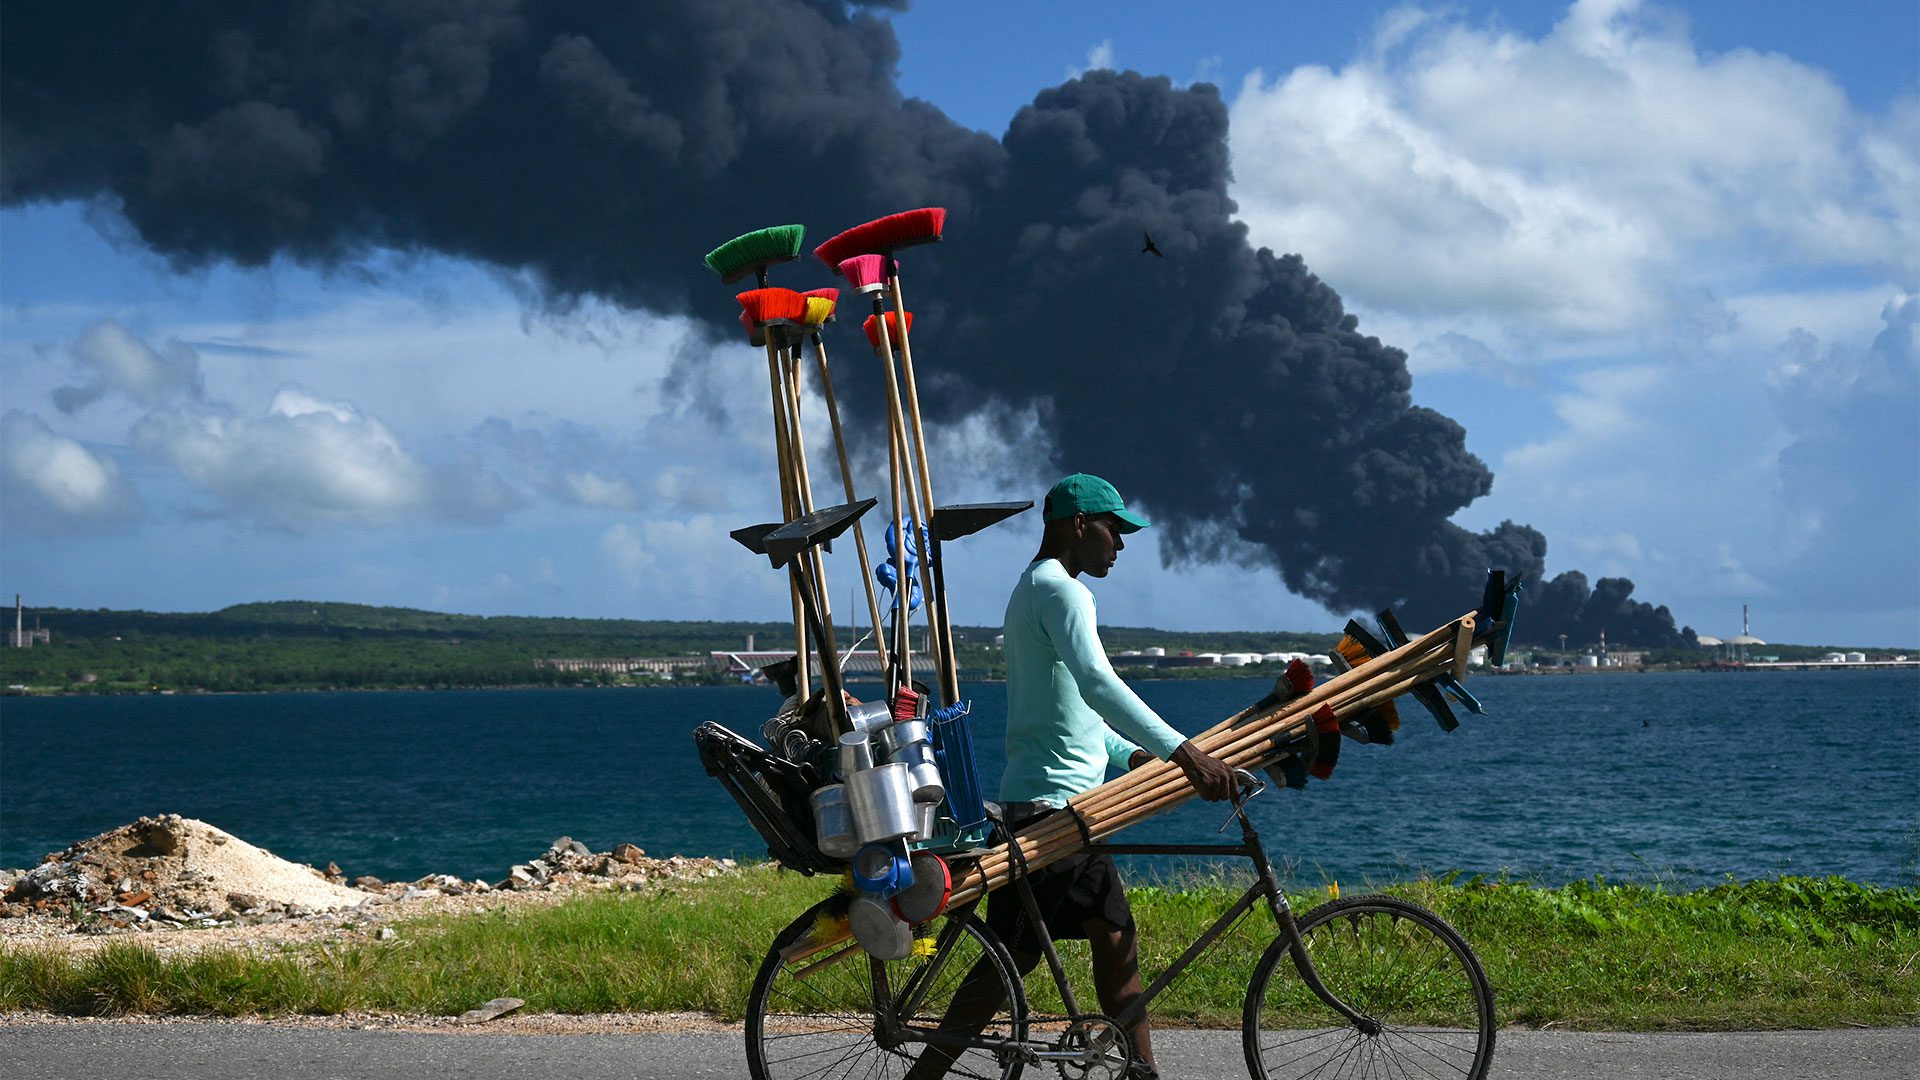 The fire comes at a time when the island has been struggling with power generation since last May (YAMIL LAGE / AFP)